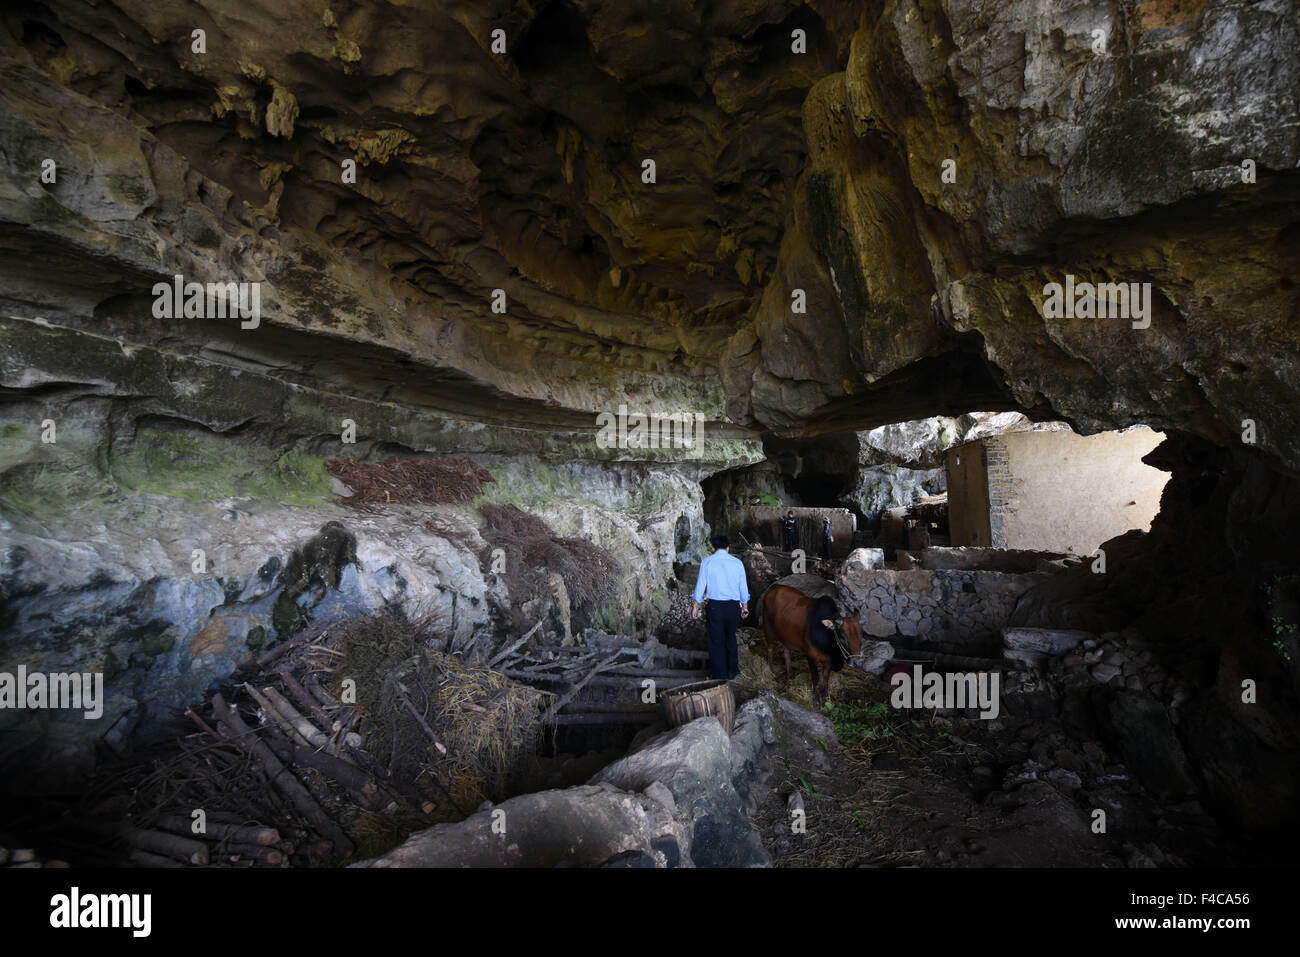 (151016) -- DAOXIAN, Oct. 16, 2015 (Xinhua) -- Photo taken on Oct. 16, 2015 shows the entrance of a cave where some tooth fossils were discovered at Daoxian County in central China's Hunan Province. Tooth fossils found in Daoxian indicate the early form of modern homo sapiens appeared in the region more than 80,000 years ago. The 47 fossils date back from 80,000 to 120,000 years and are believed to be the oldest remains of a completely modern form scientists have known in the east Asia region, the study's leading scientists said on Oct. 15, 2015.  (Xinhua/Li Ga) (yxb) Stock Photo